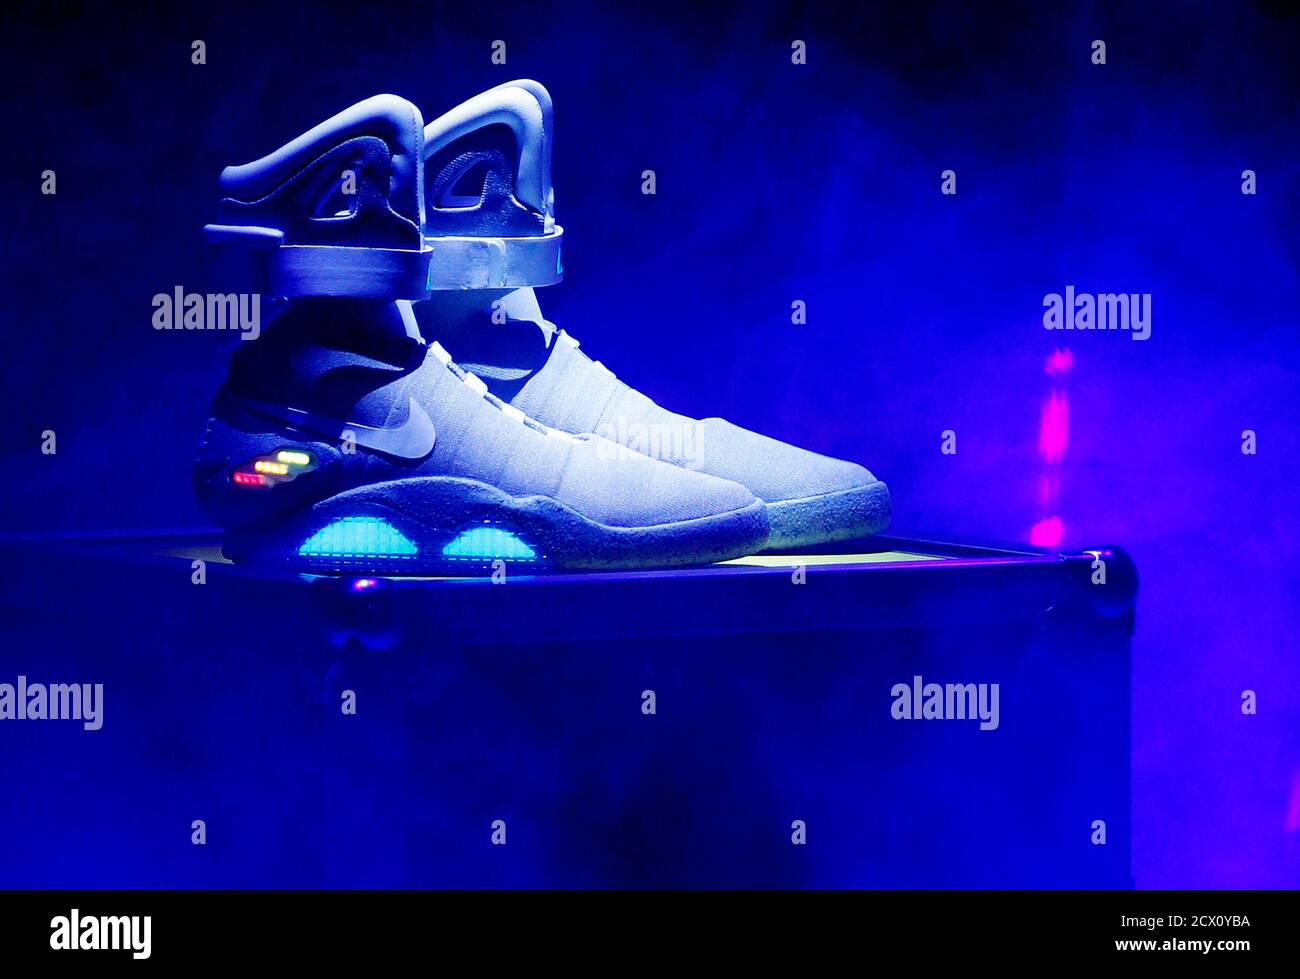 The 2011 NIKE MAG shoe, based on the original NIKE MAG worn in 2015 by the  "Back to the Future" character Marty McFly, played by Michael J. Fox, is  unveiled at The